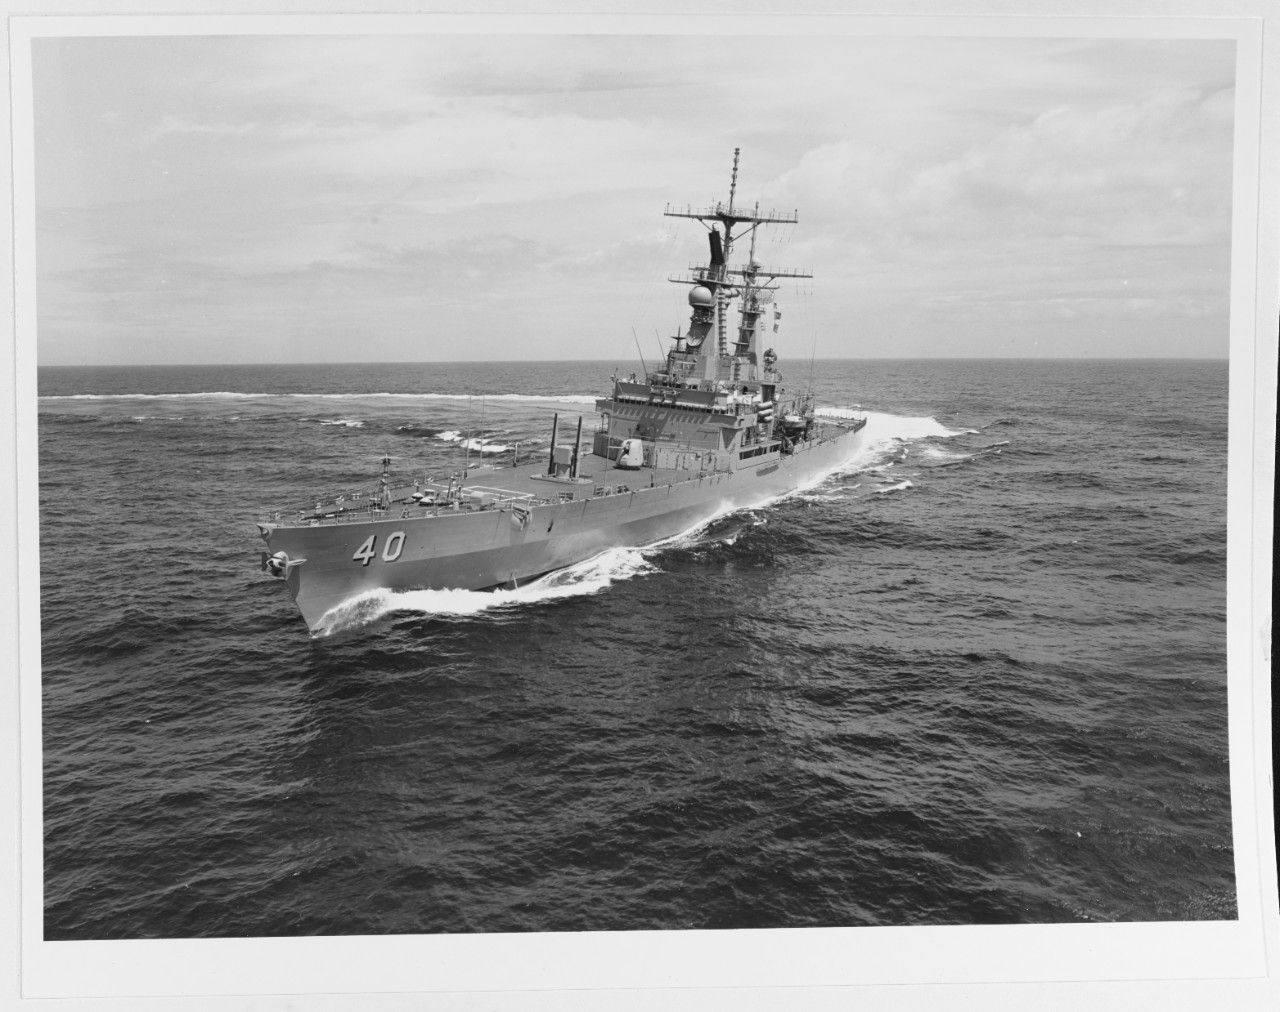 USS MISSISSIPPI (CGN-40)